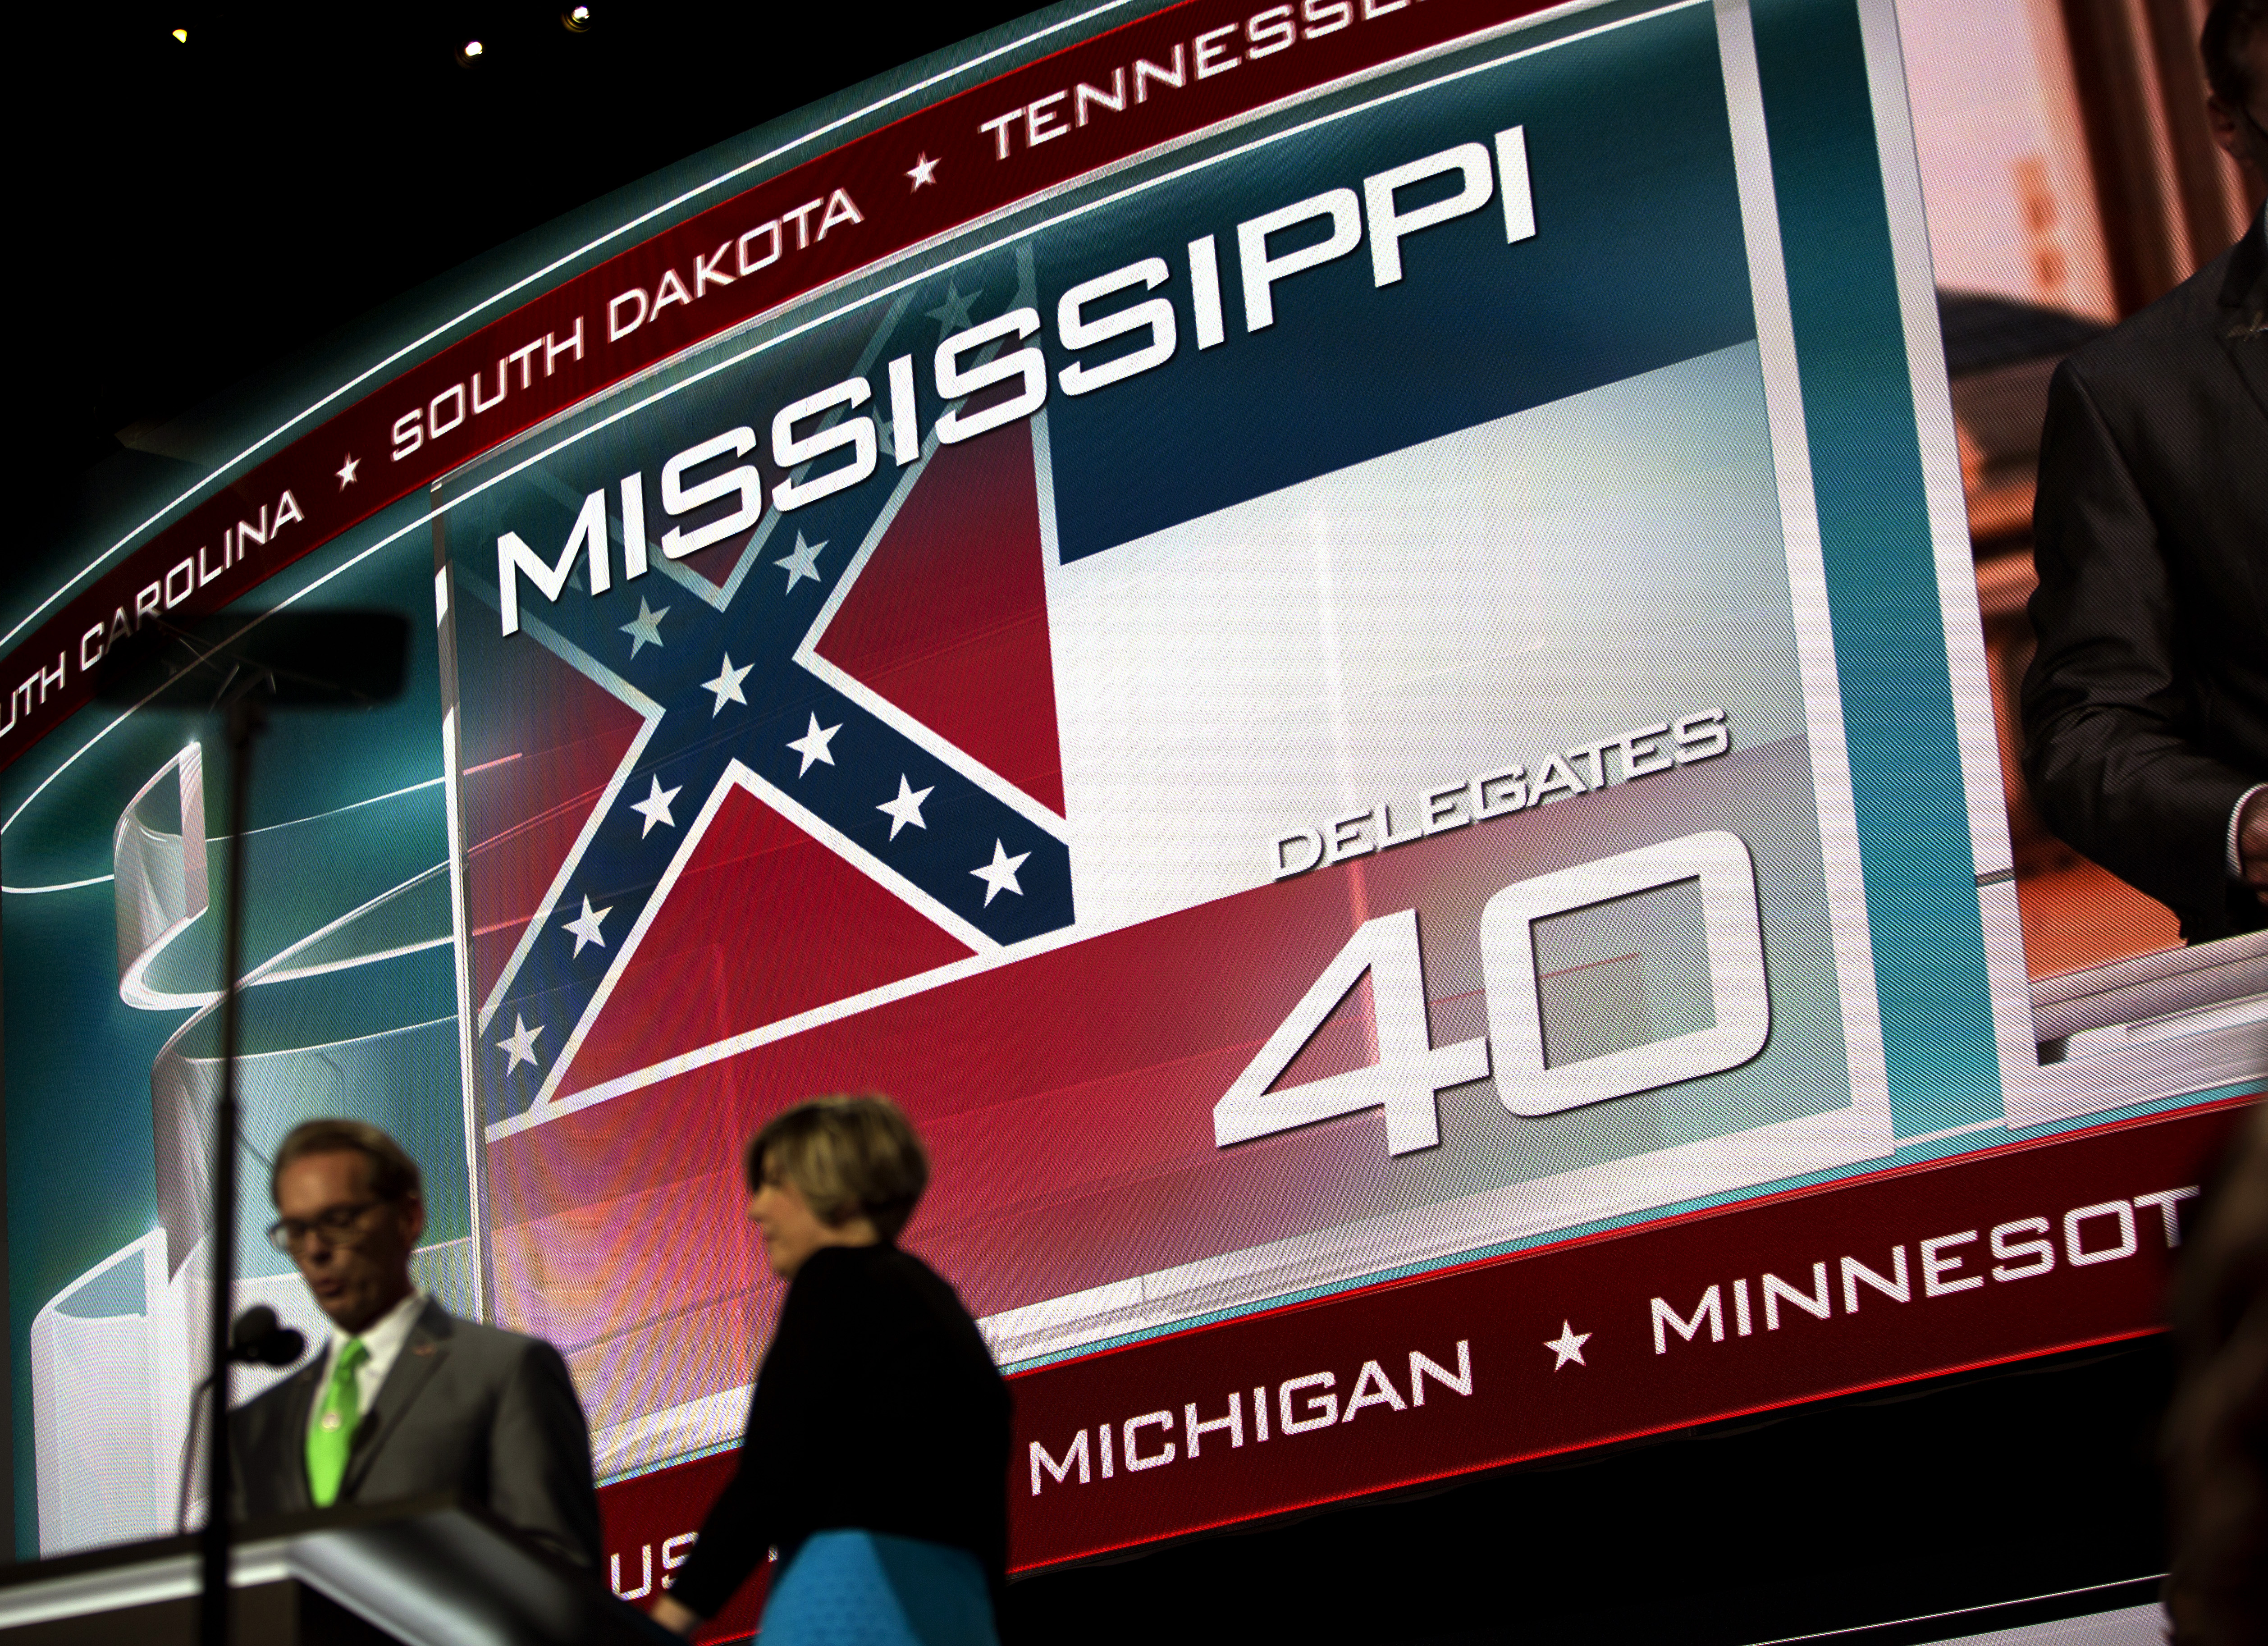 A screen displays the state flag of Mississippi, the only state that includes the Confederate battle emblem in its official state flag, at the Republican National Convention in Cleveland on Tuesday, July 19, 2016.